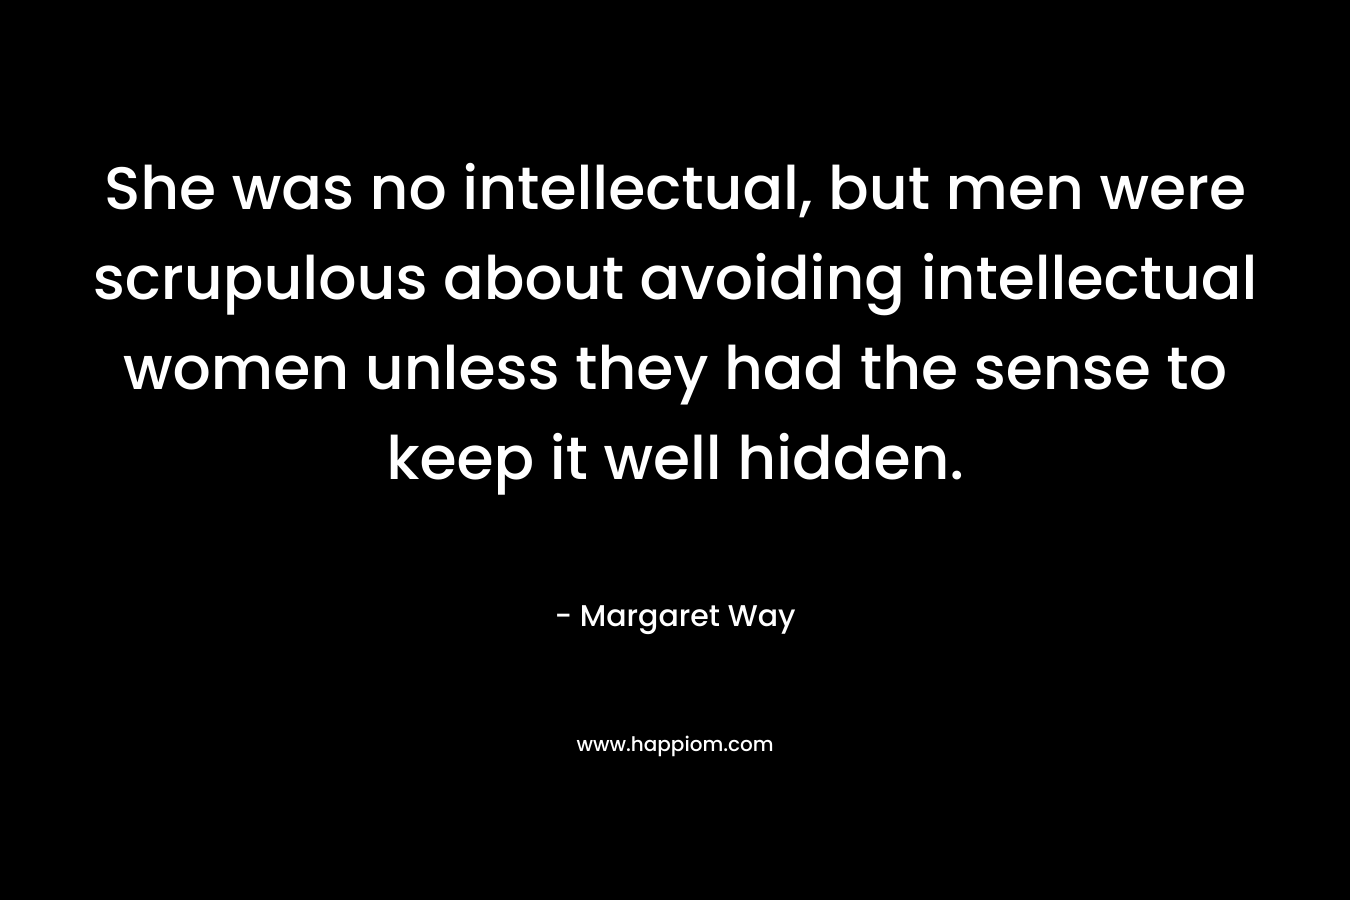 She was no intellectual, but men were scrupulous about avoiding intellectual women unless they had the sense to keep it well hidden.